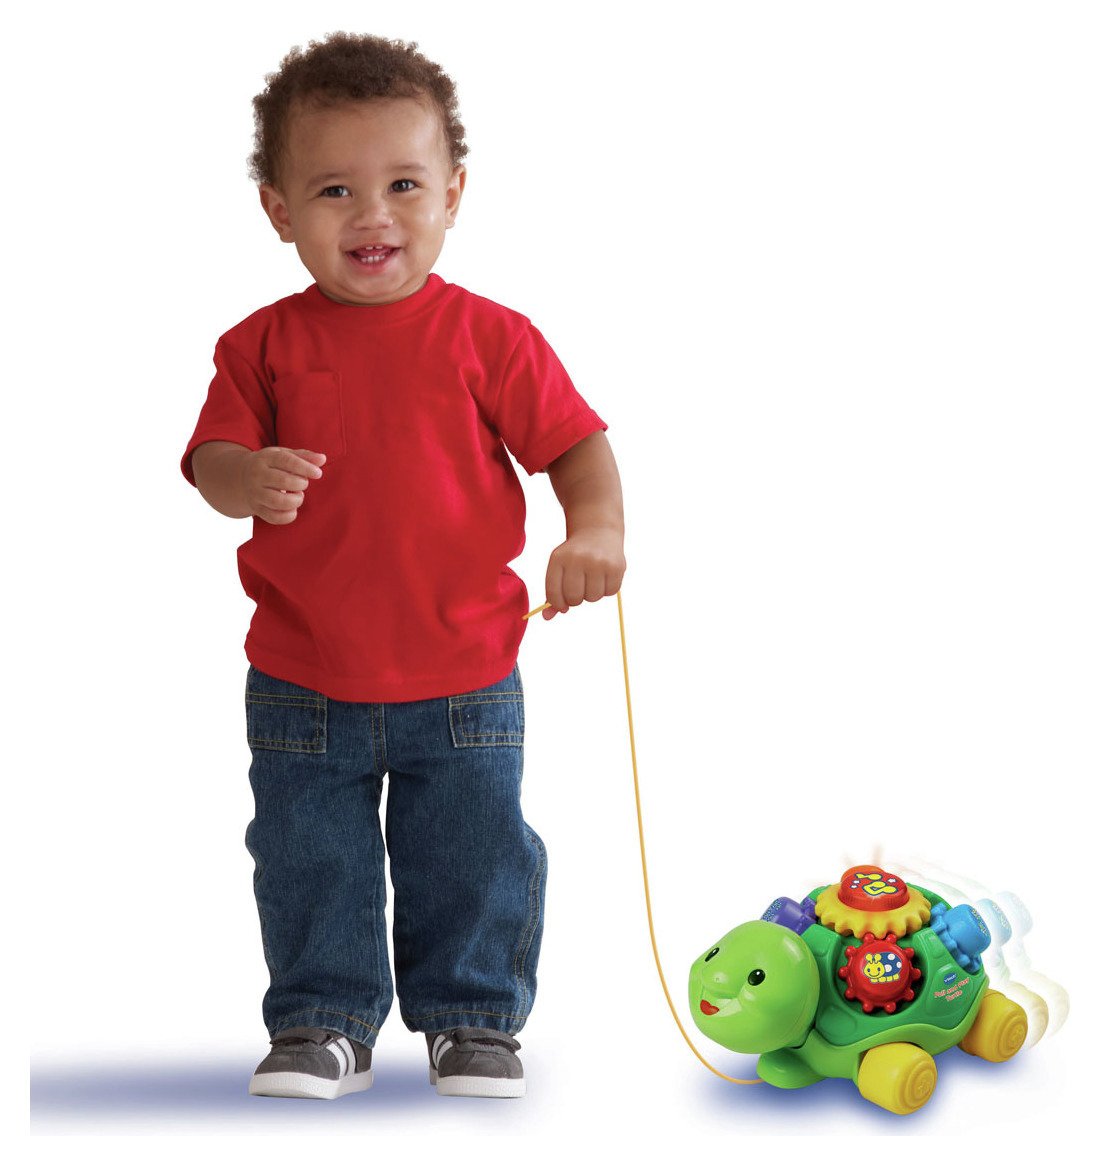 VTech Pull & Play Turtle